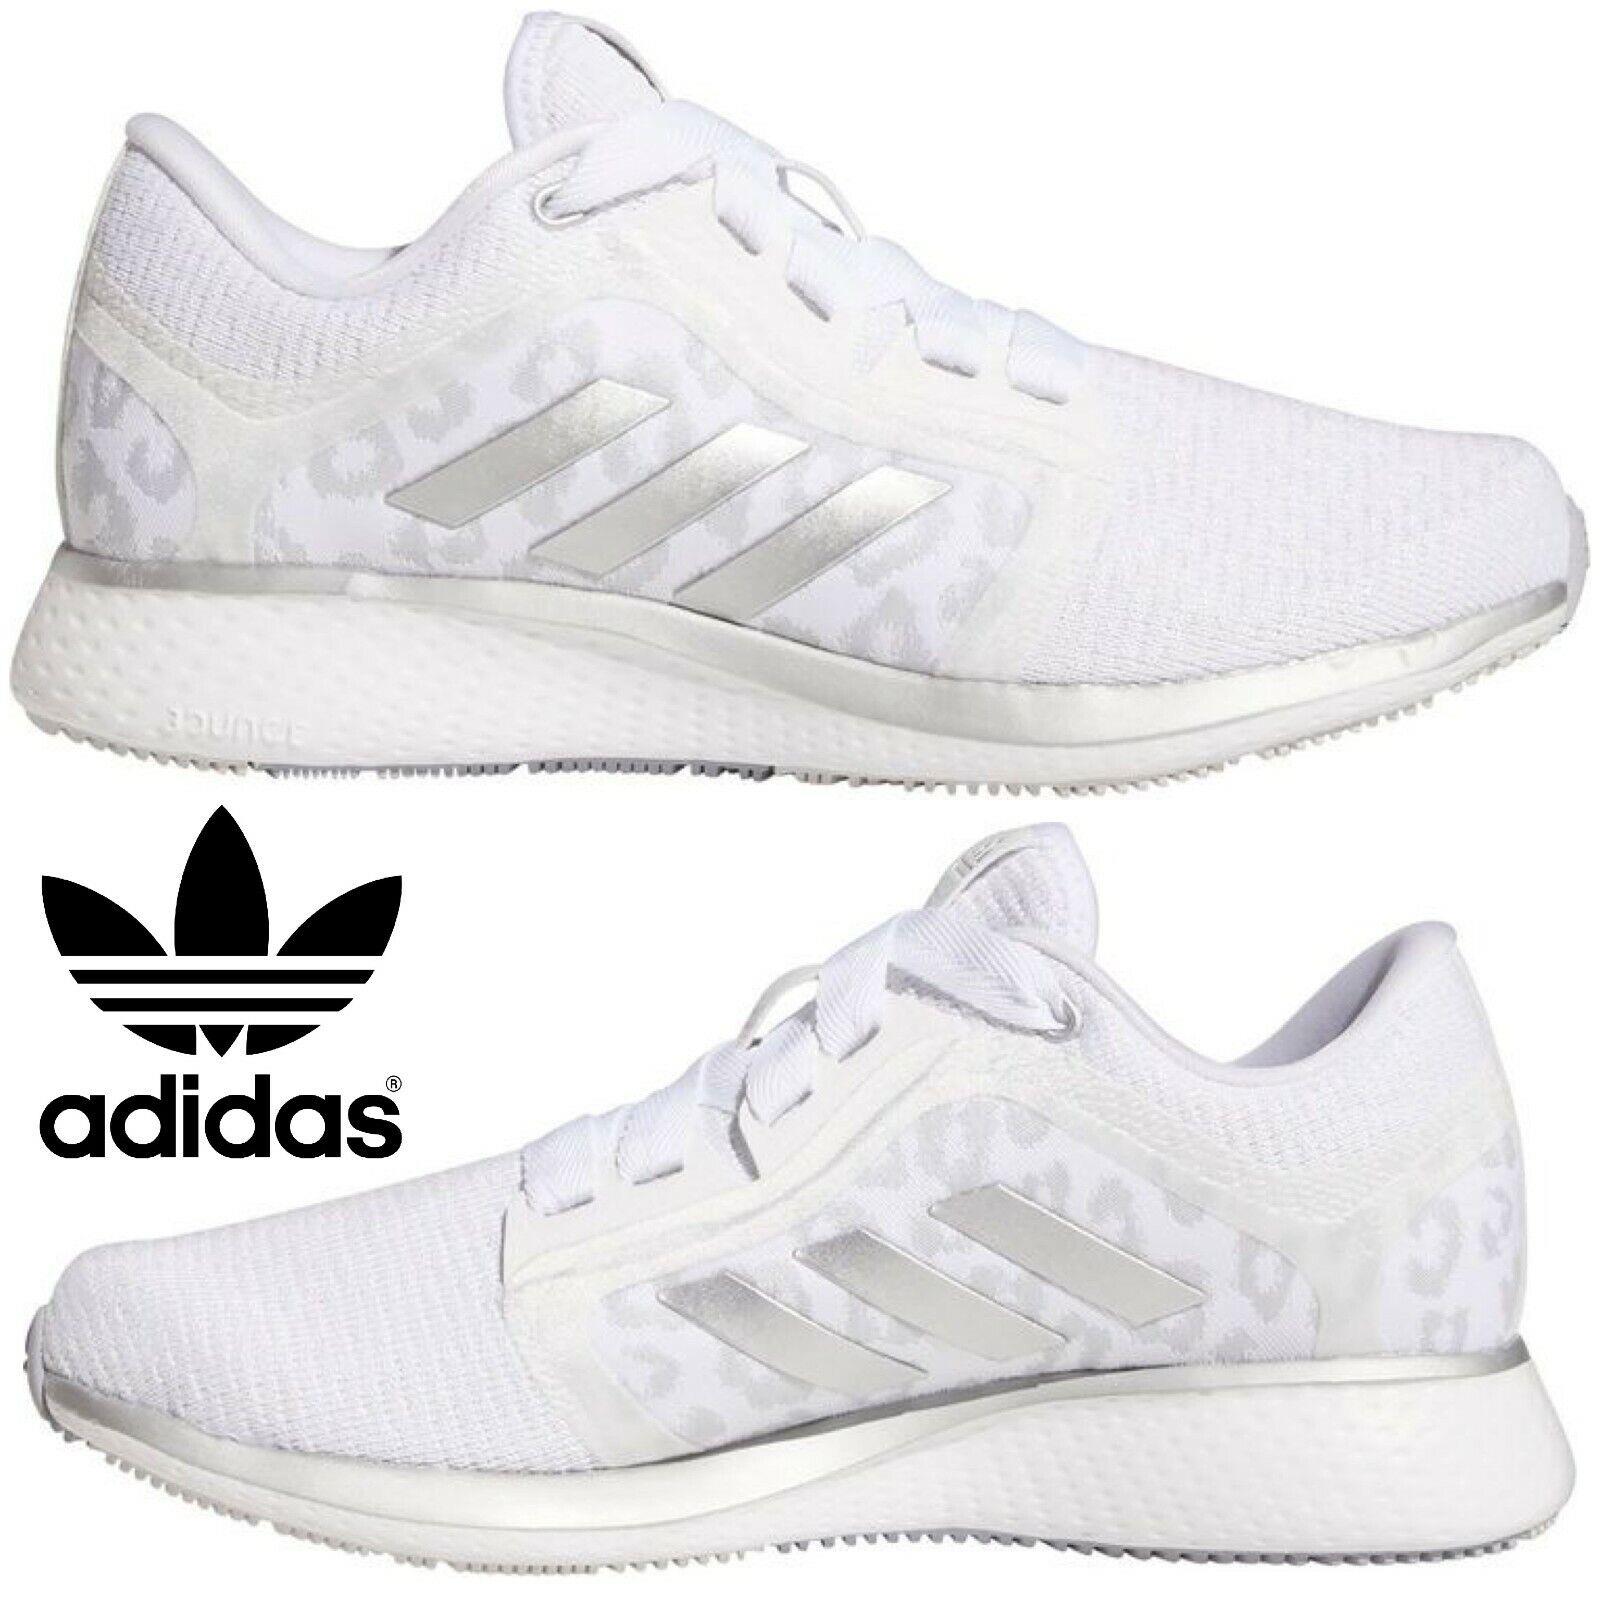 Adidas Edge Lux 4 Women`s Sneakers Sport Running Gym Comfort Athletic Shoes - White , GREY/WHITE/LEOPARD Manufacturer